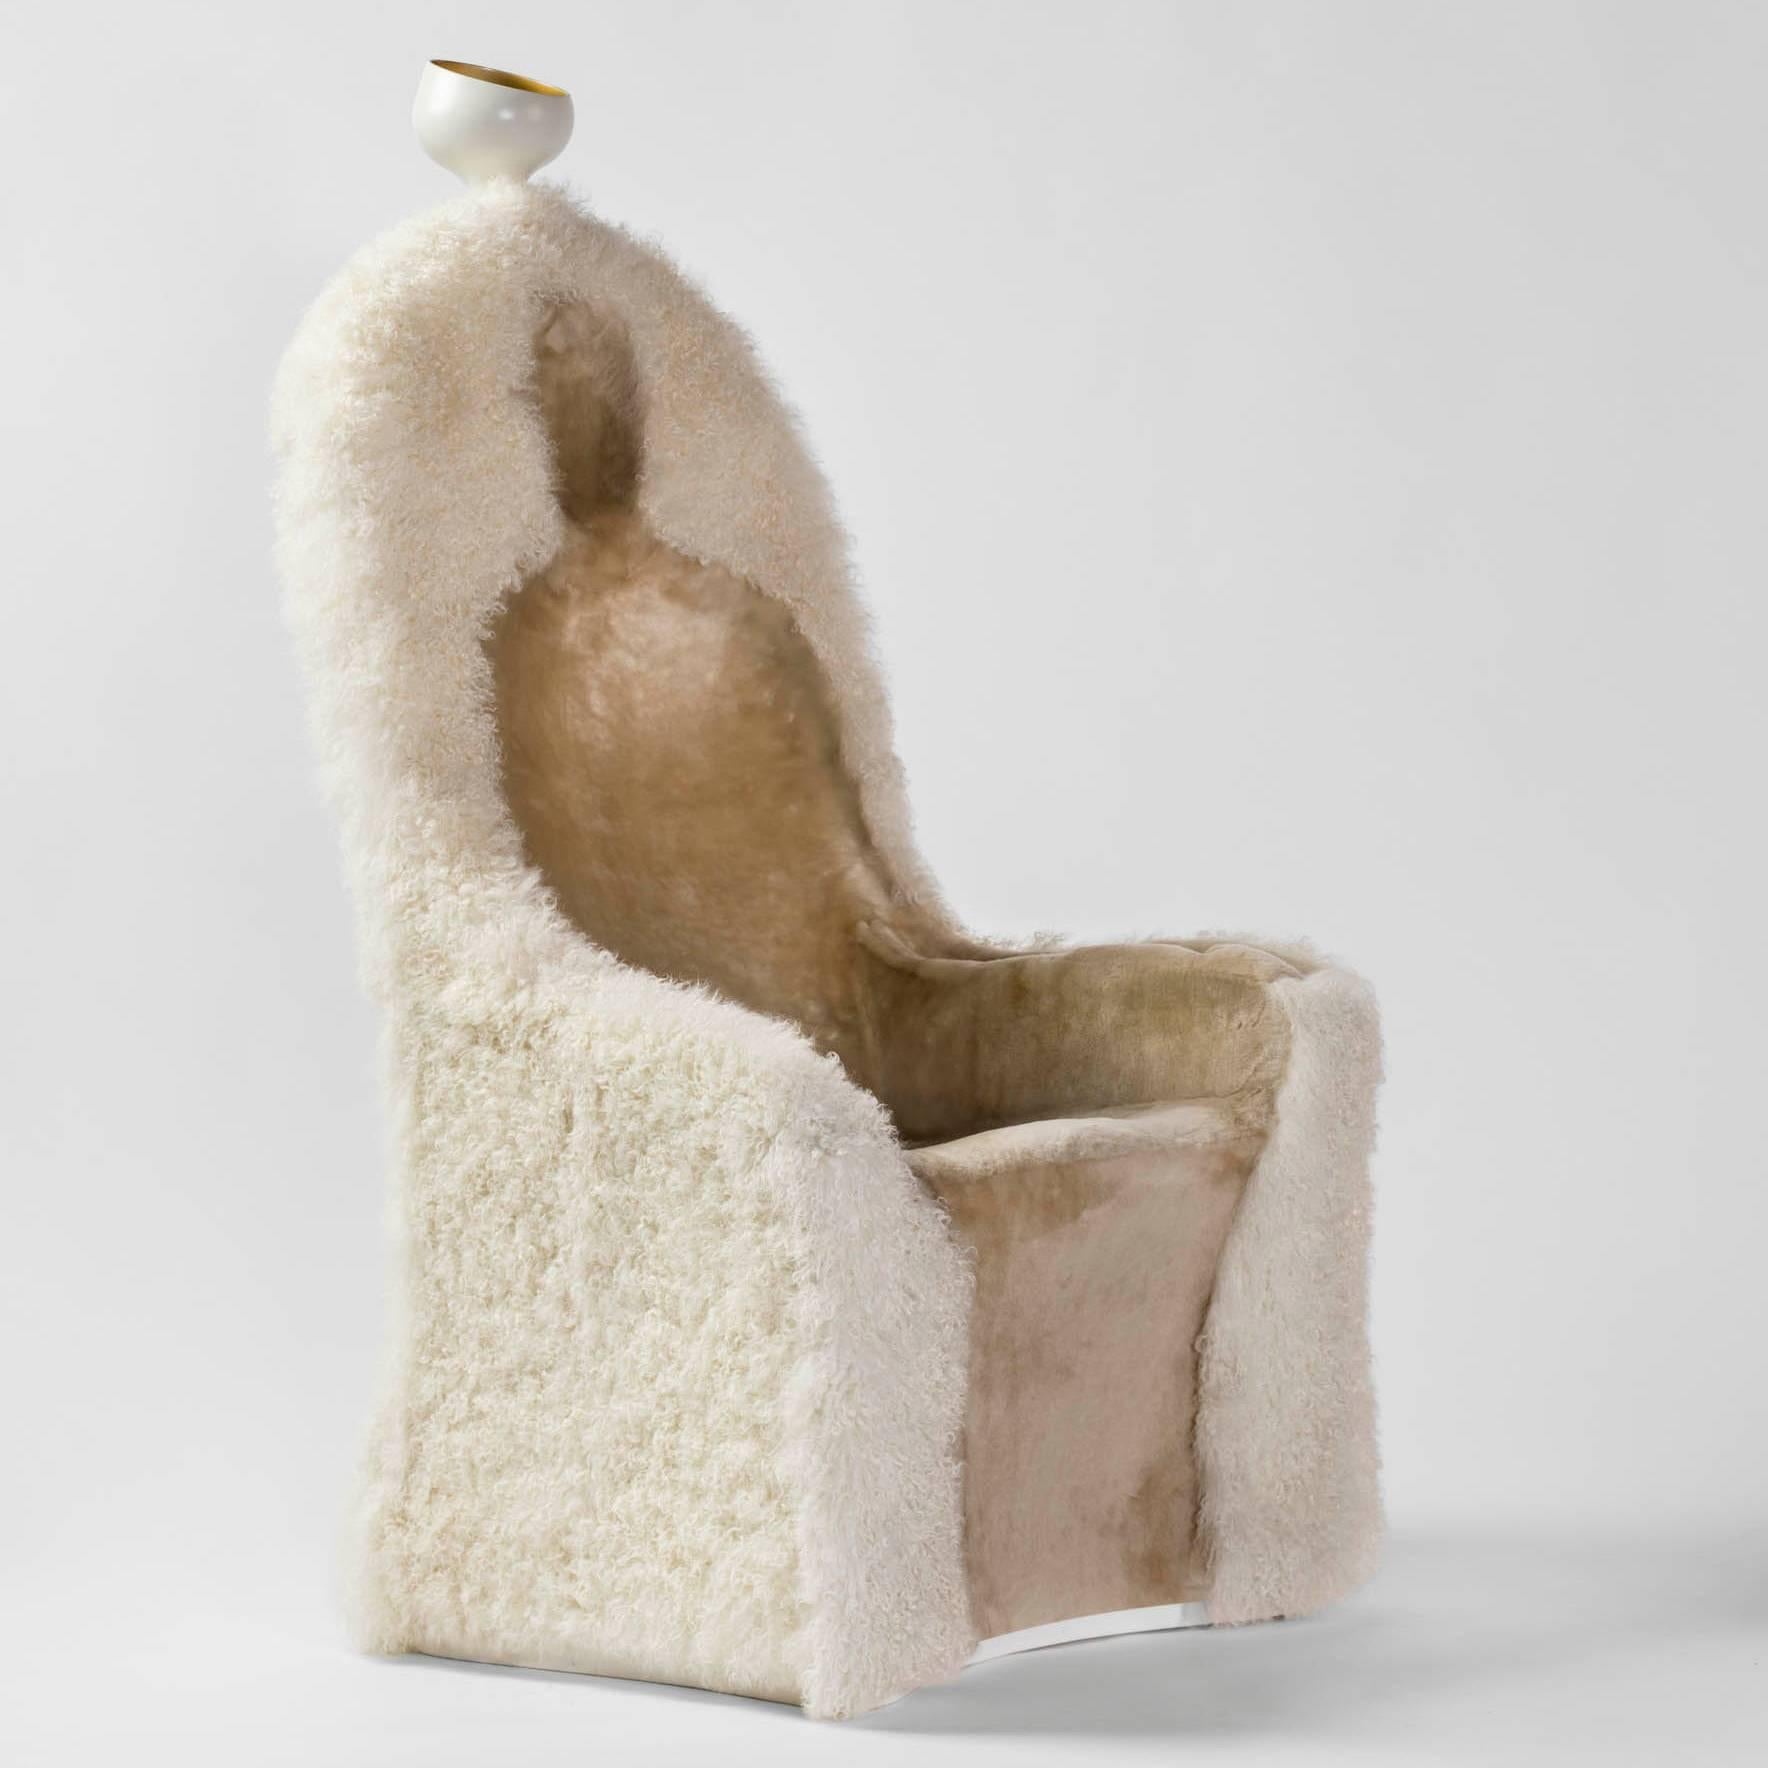 Armchair designed by Salvador Dali manufactured in Spain from BD.

